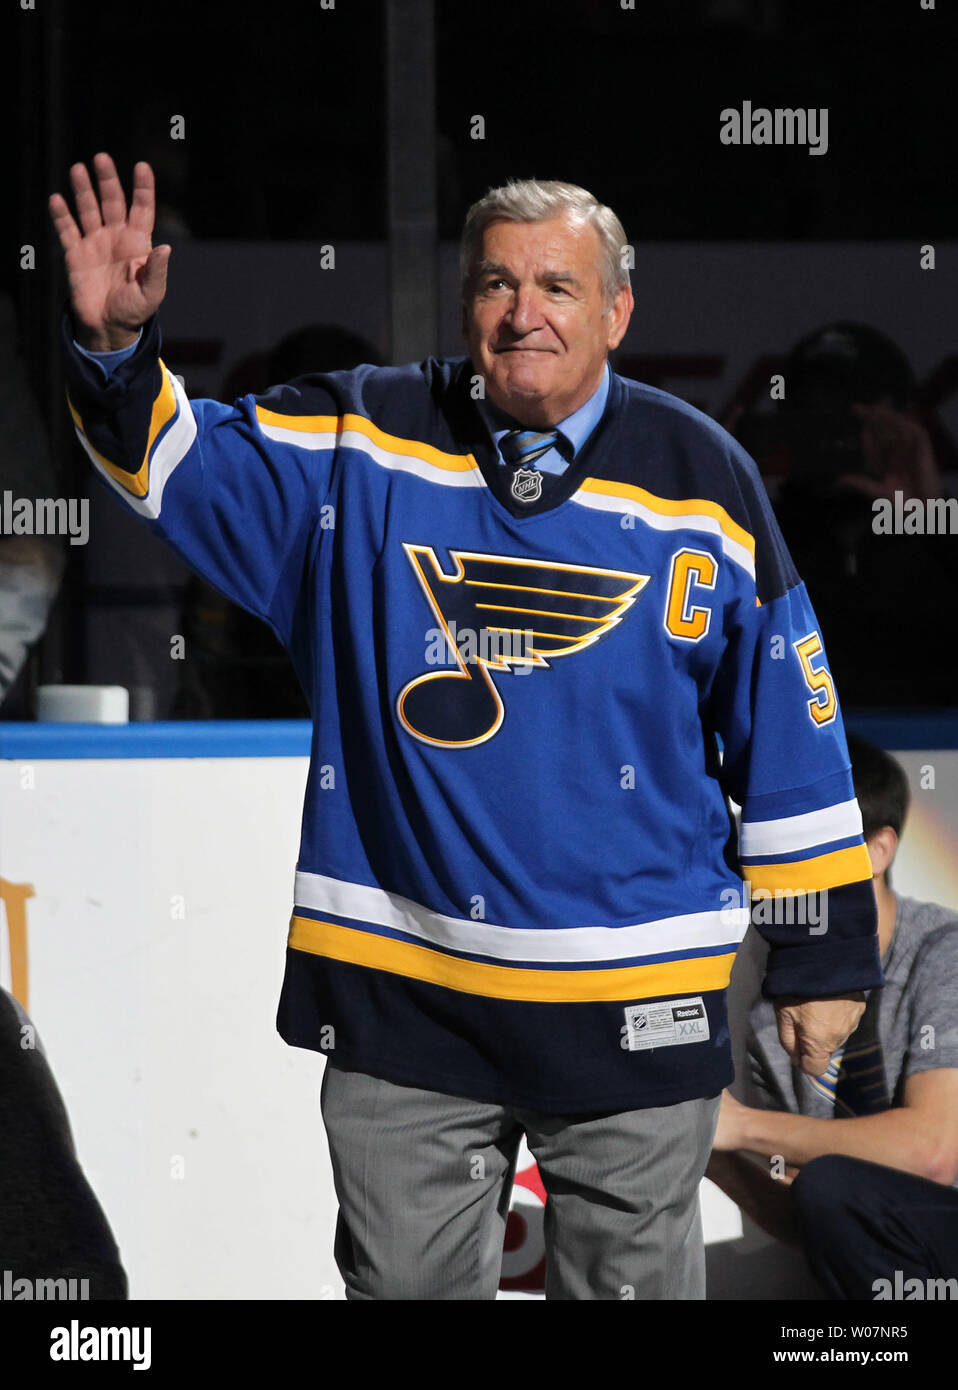 St. Louis Blues Forward Bernie Federko as seen after the game during  News Photo - Getty Images